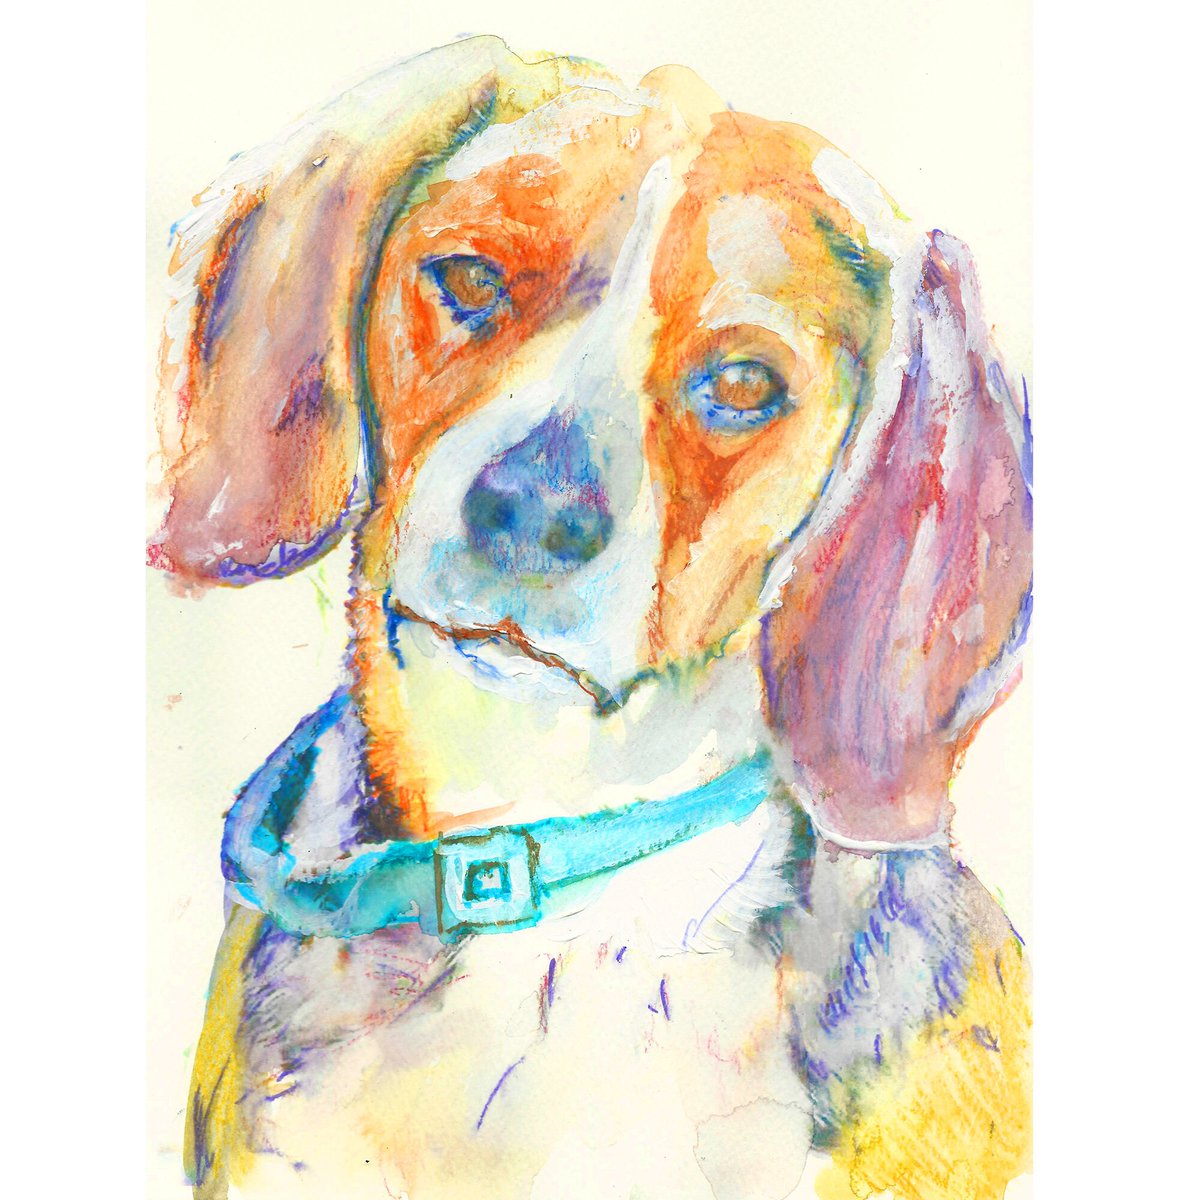 Beagle Painting Print, Abstract Watercolour Picture, Colourful Expressive Tricolor Dog Portrait Hand Signed by Artist Oscar Jetson 8x10 tuppu.net/197ced8a #DogFishArtCo #Etsy #BeaglePrint